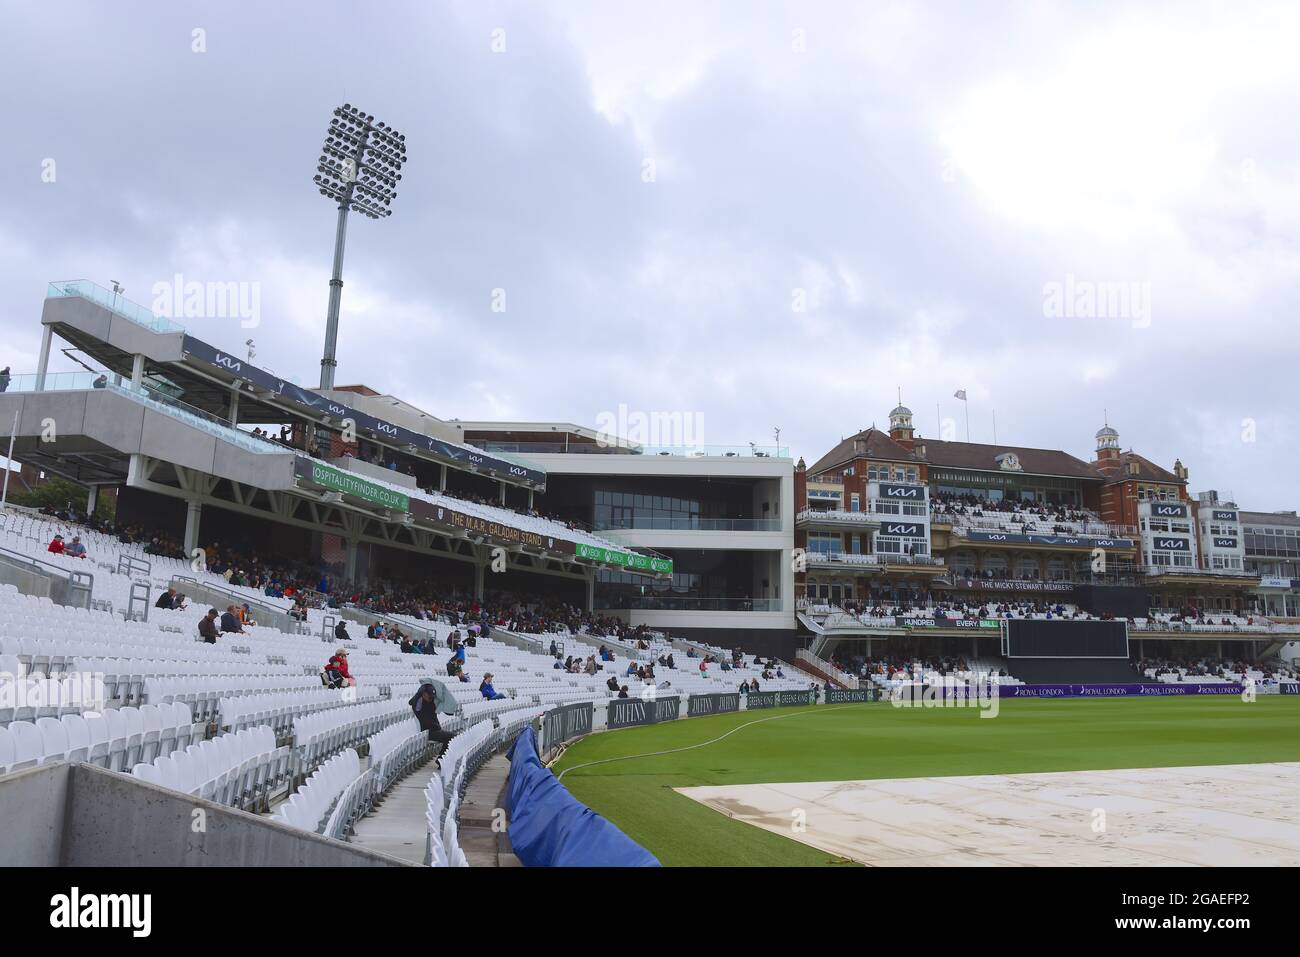 London, UK. 30th July, 2021. 30 July, 2021. London, UK. The newly opened  M.A.R. Galadari Stand next to the Micky Stewart Members’ Pavilion as rain delays the start of play as Surrey take on Northamptonshire in the Royal London One-day Cup at the Kia Oval. David Rowe/ Alamy Live News Credit: David Rowe/Alamy Live News Stock Photo